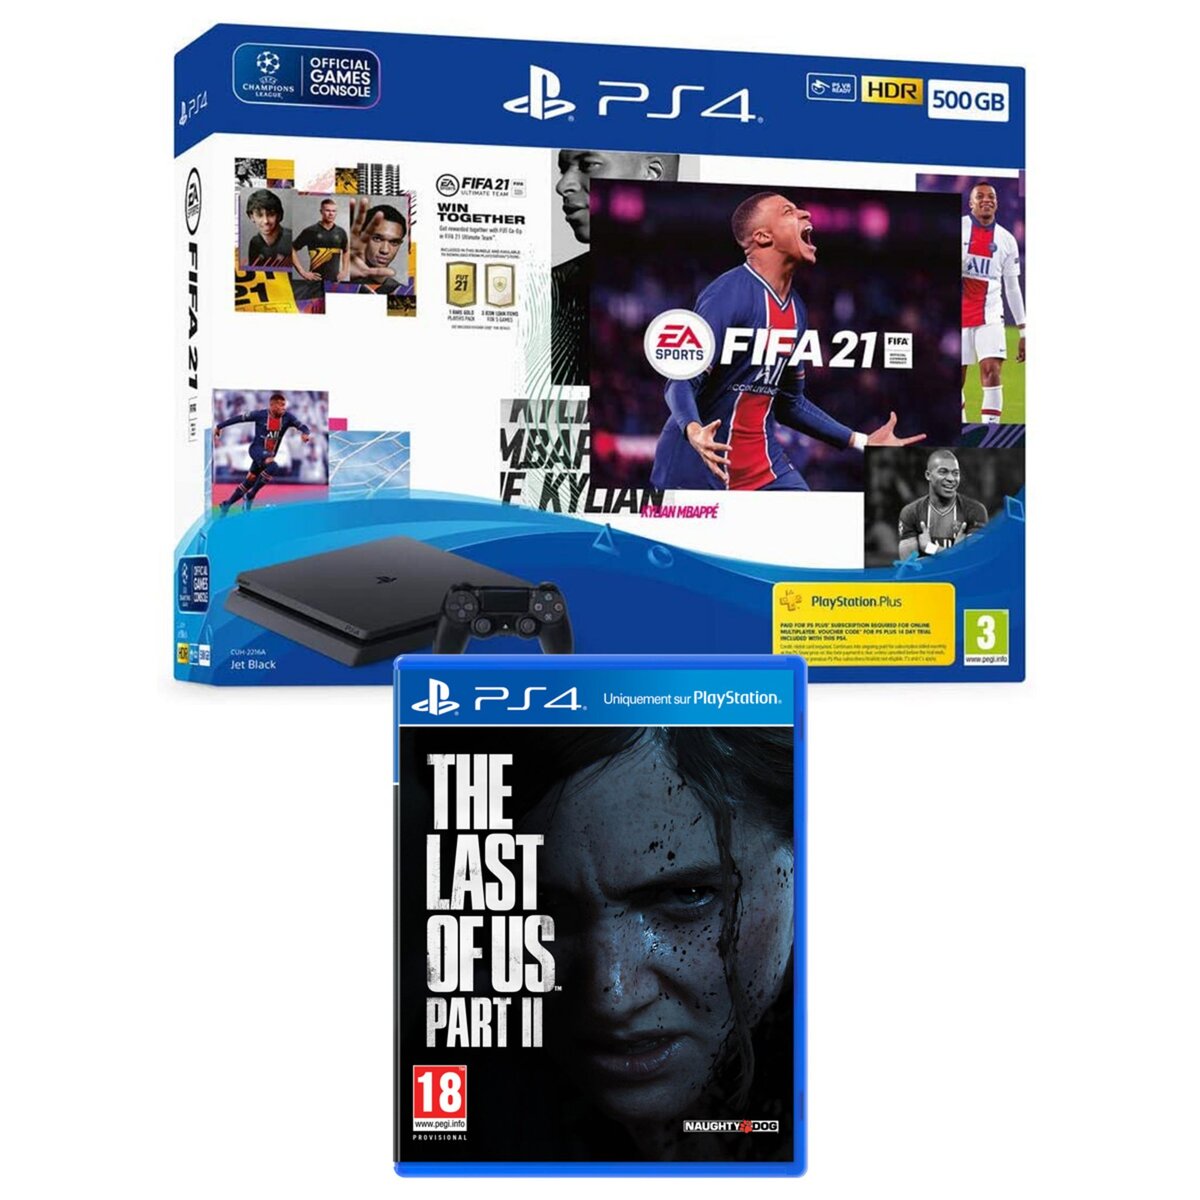 SONY Console PS4 500Go + Fifa 21 + The Last of Us Part II